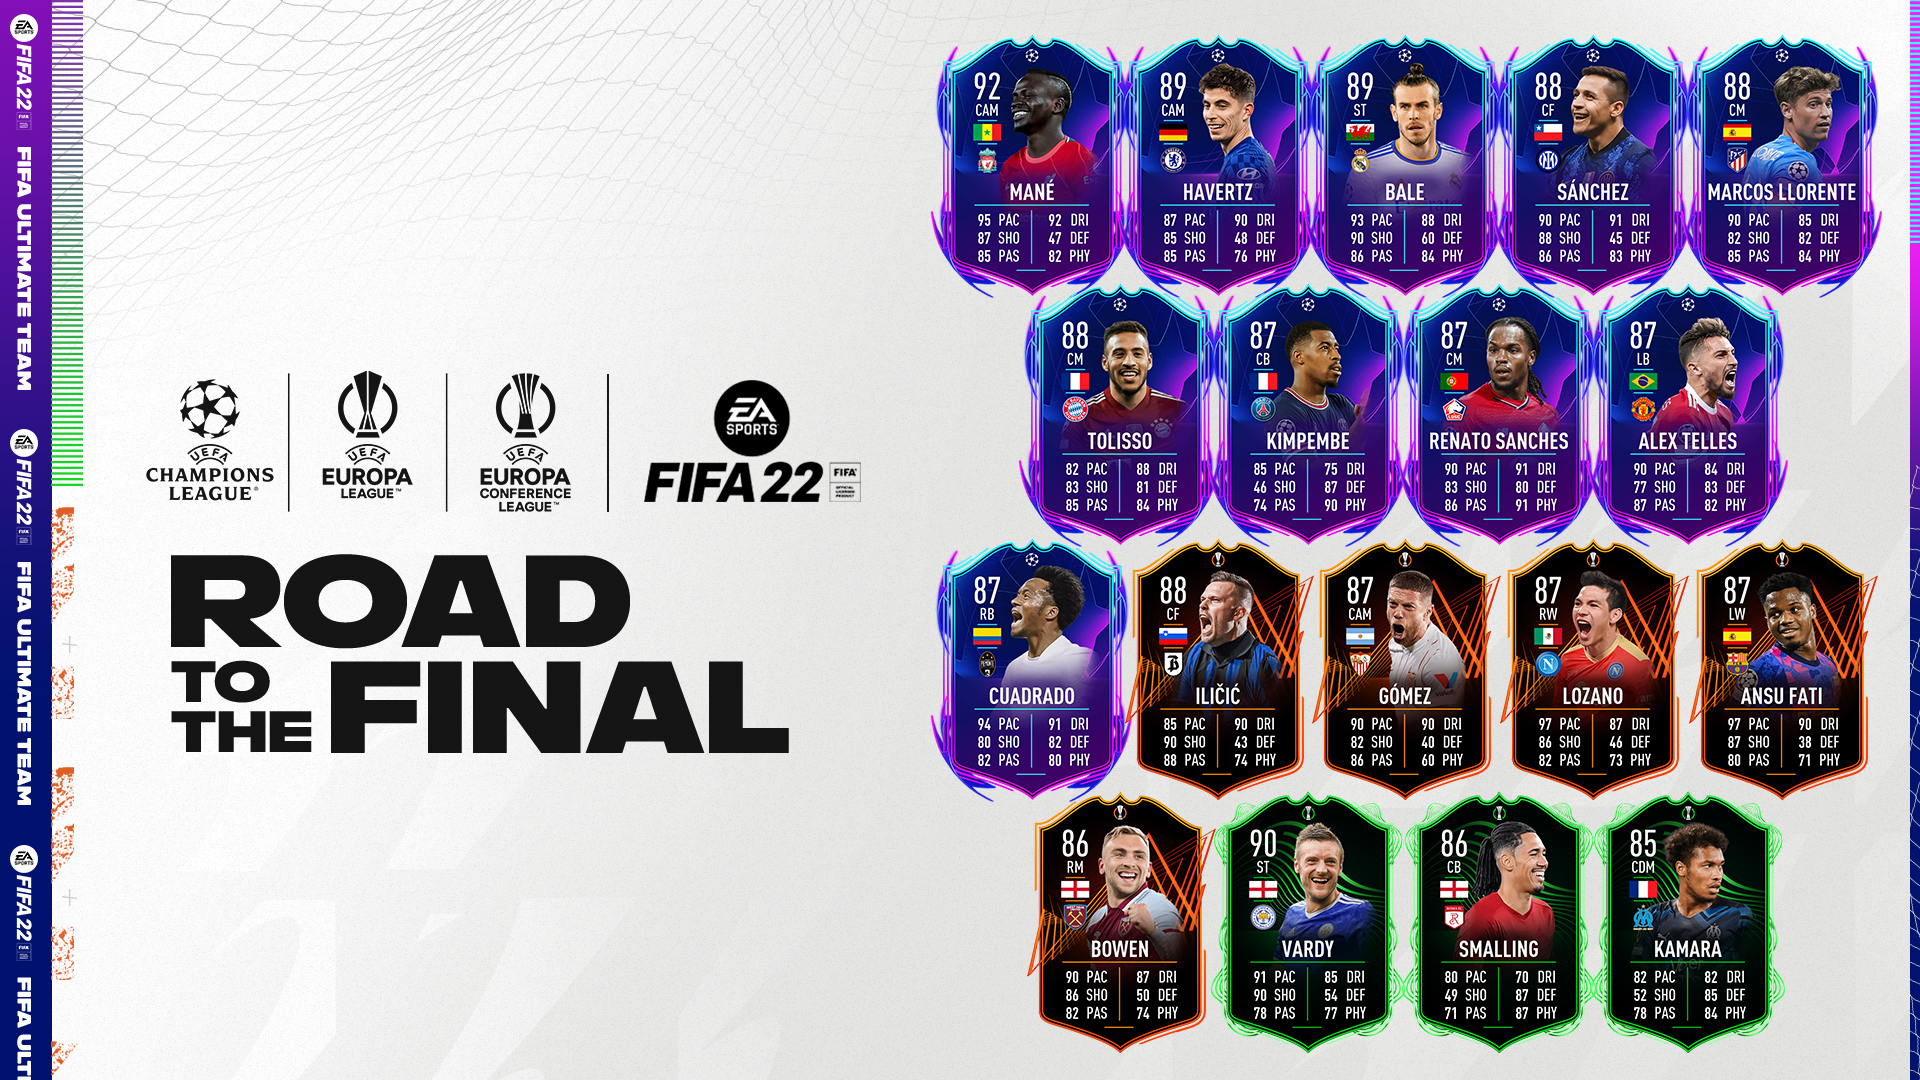 Road to the Final promo brings new dynamic player items to FIFA 22